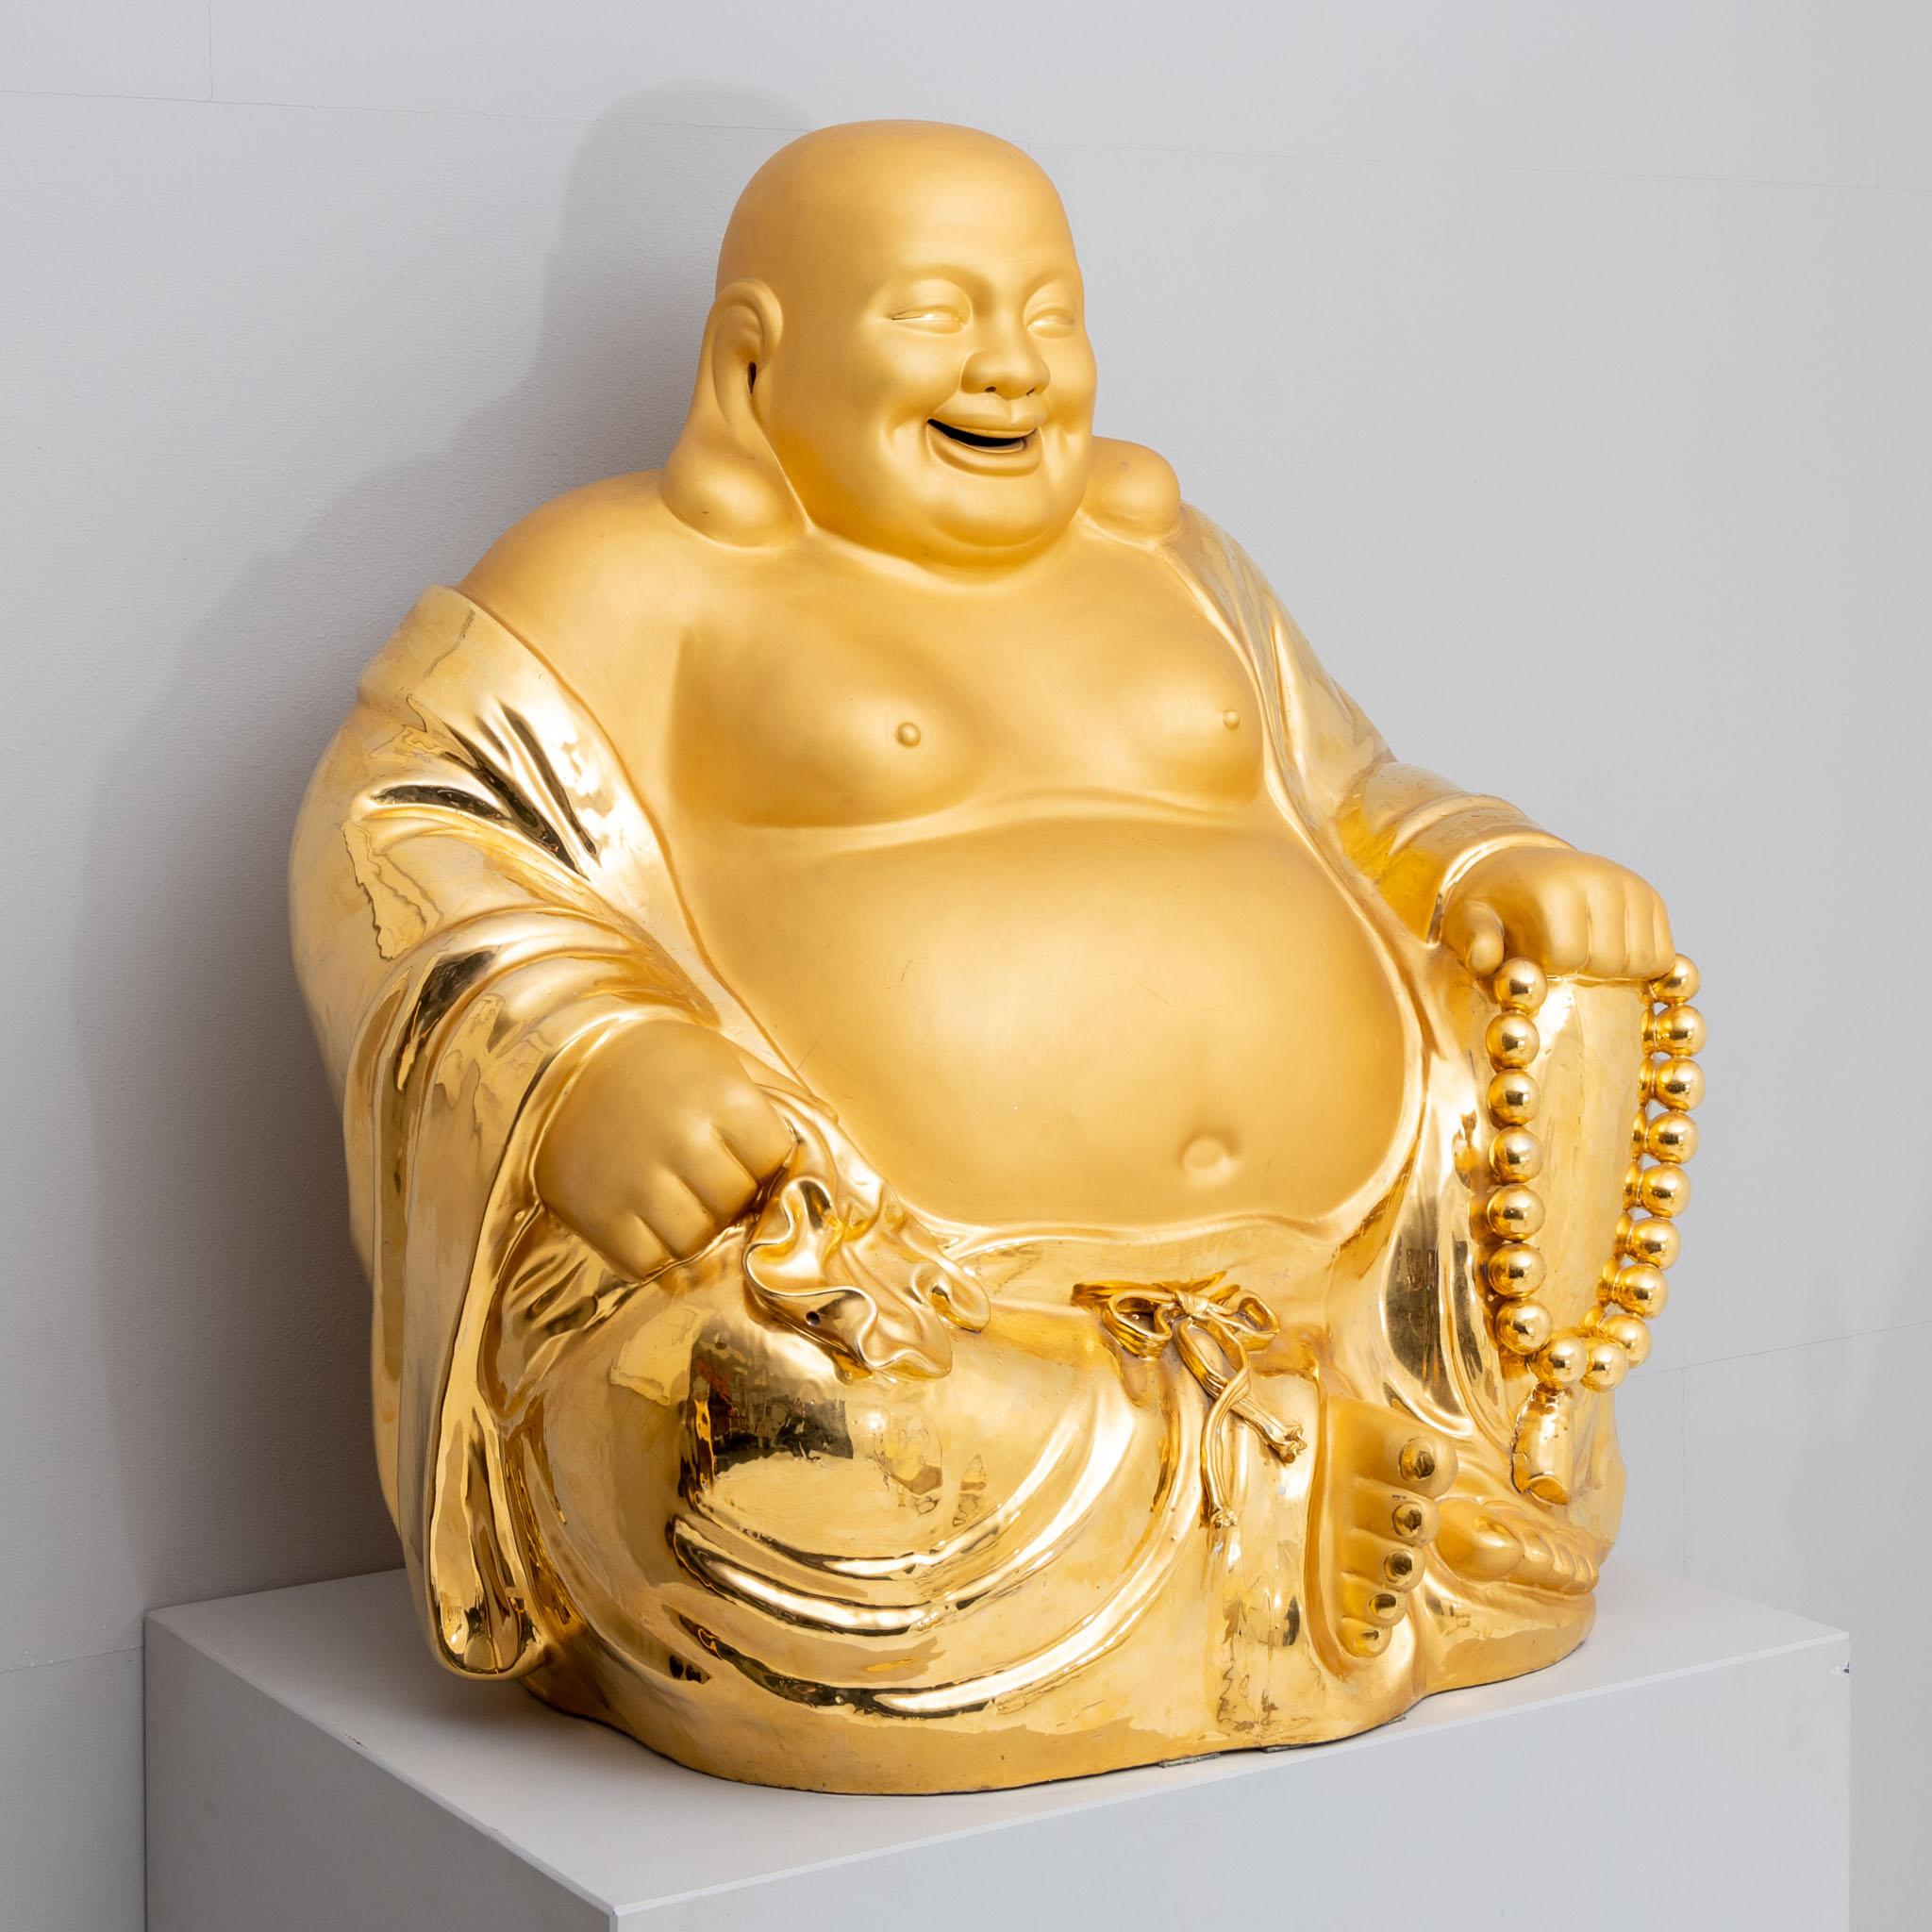 Very large Happy Buddha made of porcelain with golden patination.